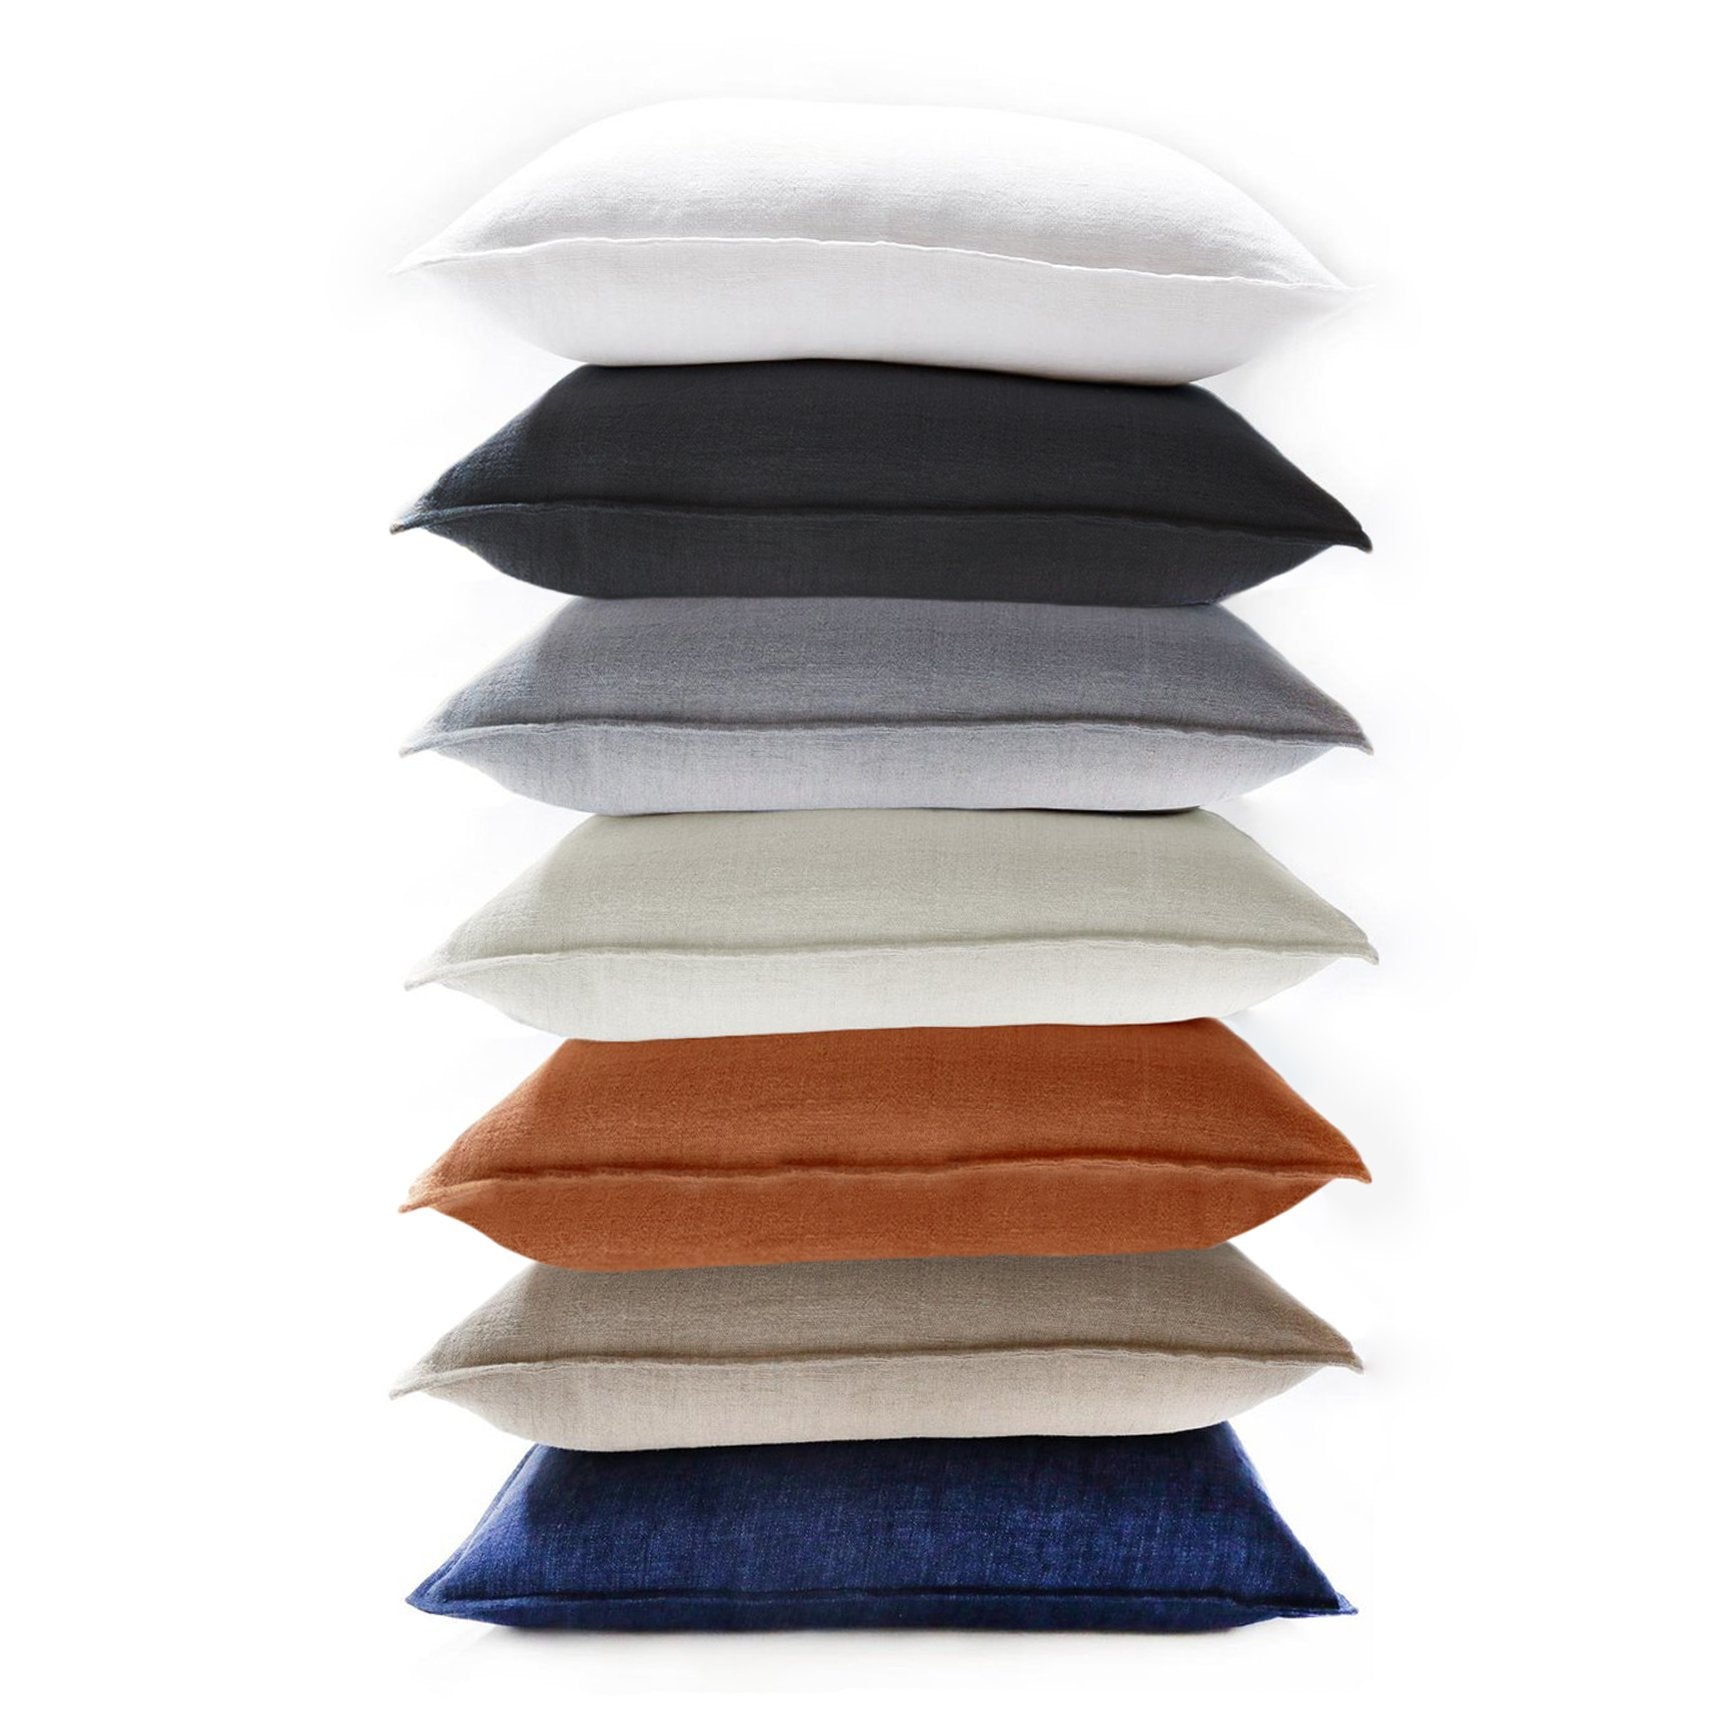 Oversized pillows by pom pom at home - throw accent pillows - fig linens